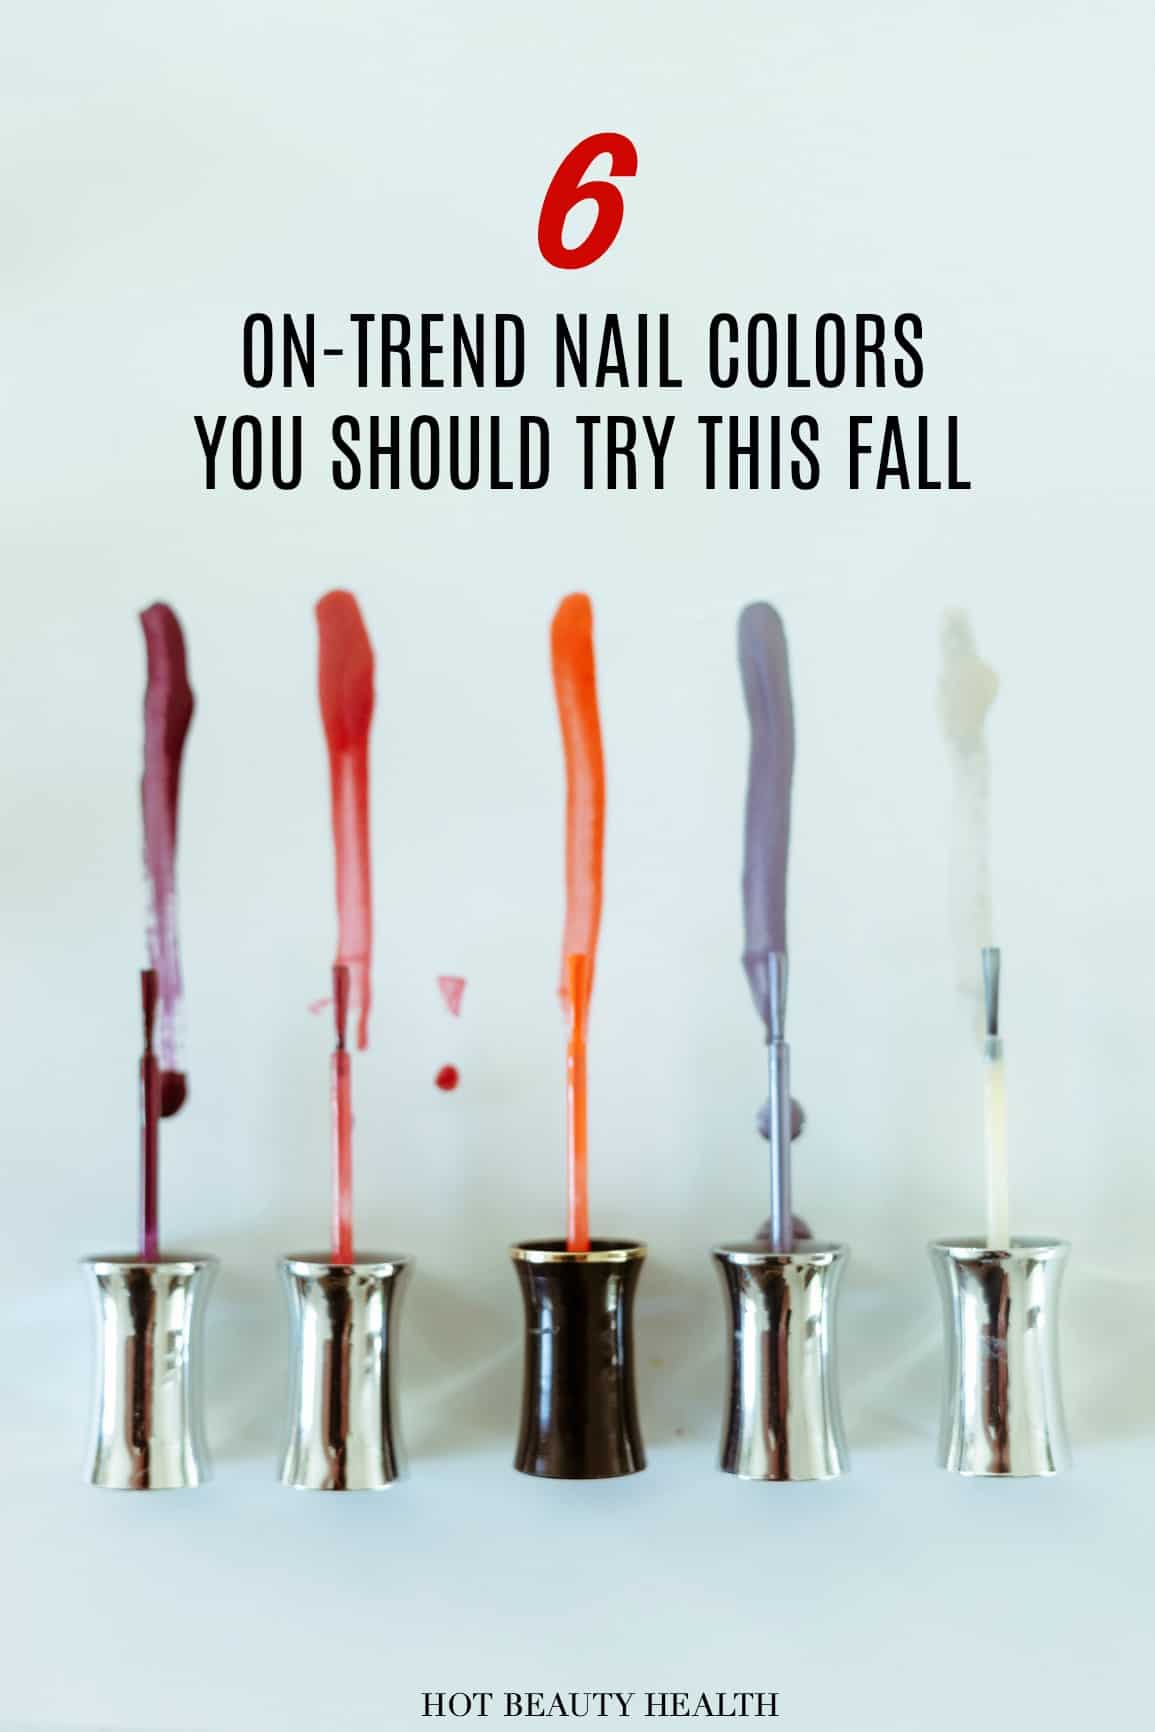 Here are 6 on-trend nail colors you should try for fall 2017. See our top color picks from OPI, Essie, and more!